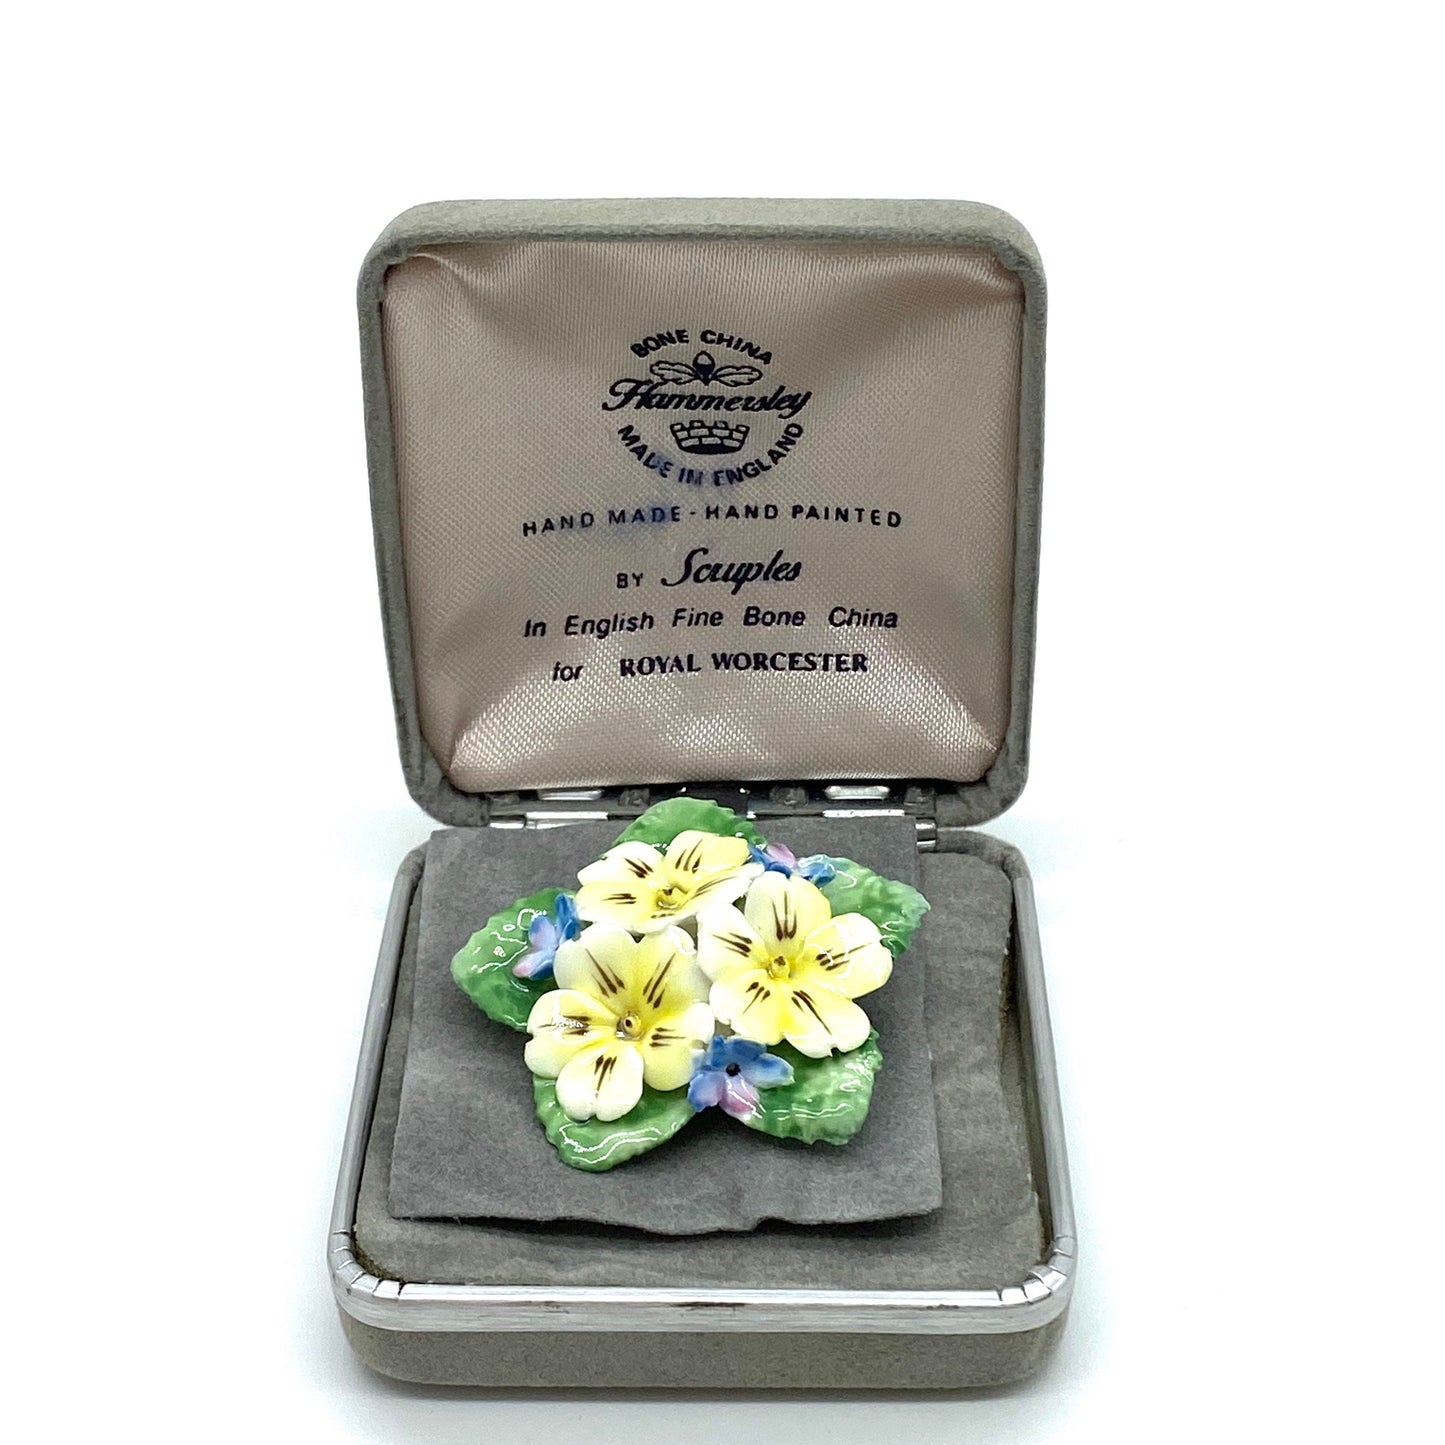 Hammersley 1970's Royal Worcester English Fine Bone China Flower Brooch Hand Made and Hand Painted by Scruples in Original Box